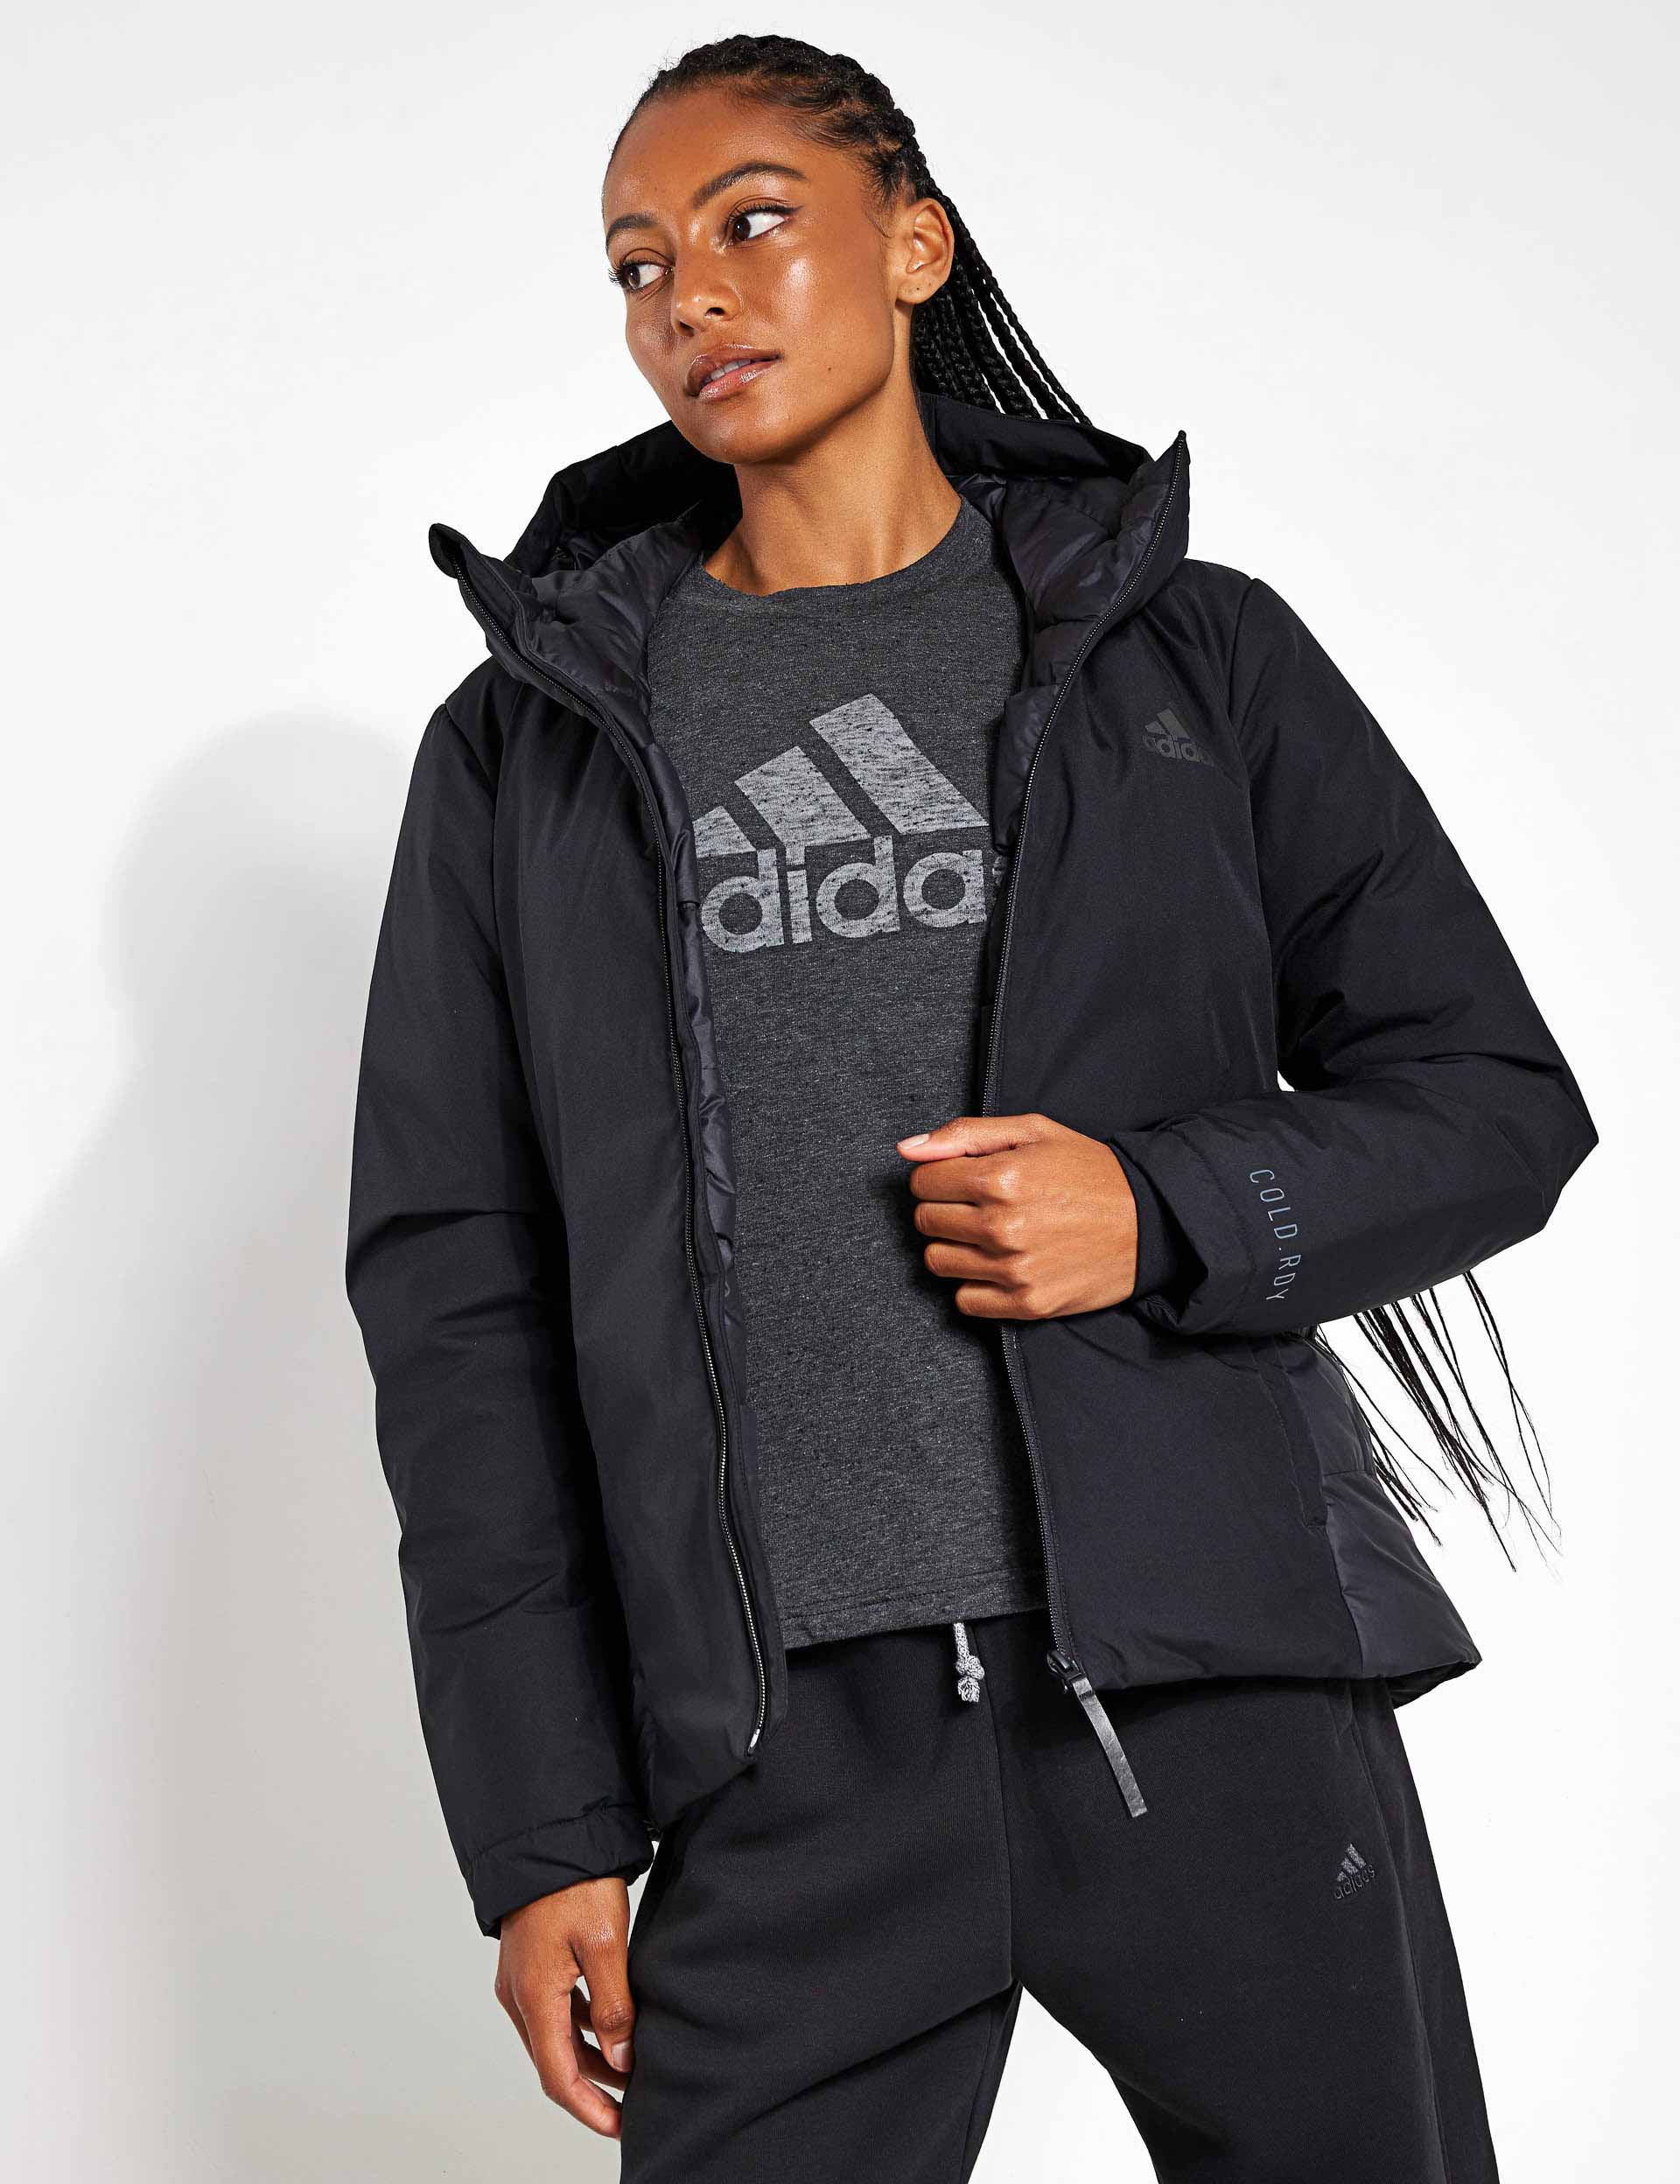 | - Black The adidas | Edit Jacket Sports COLD.RDY Traveer